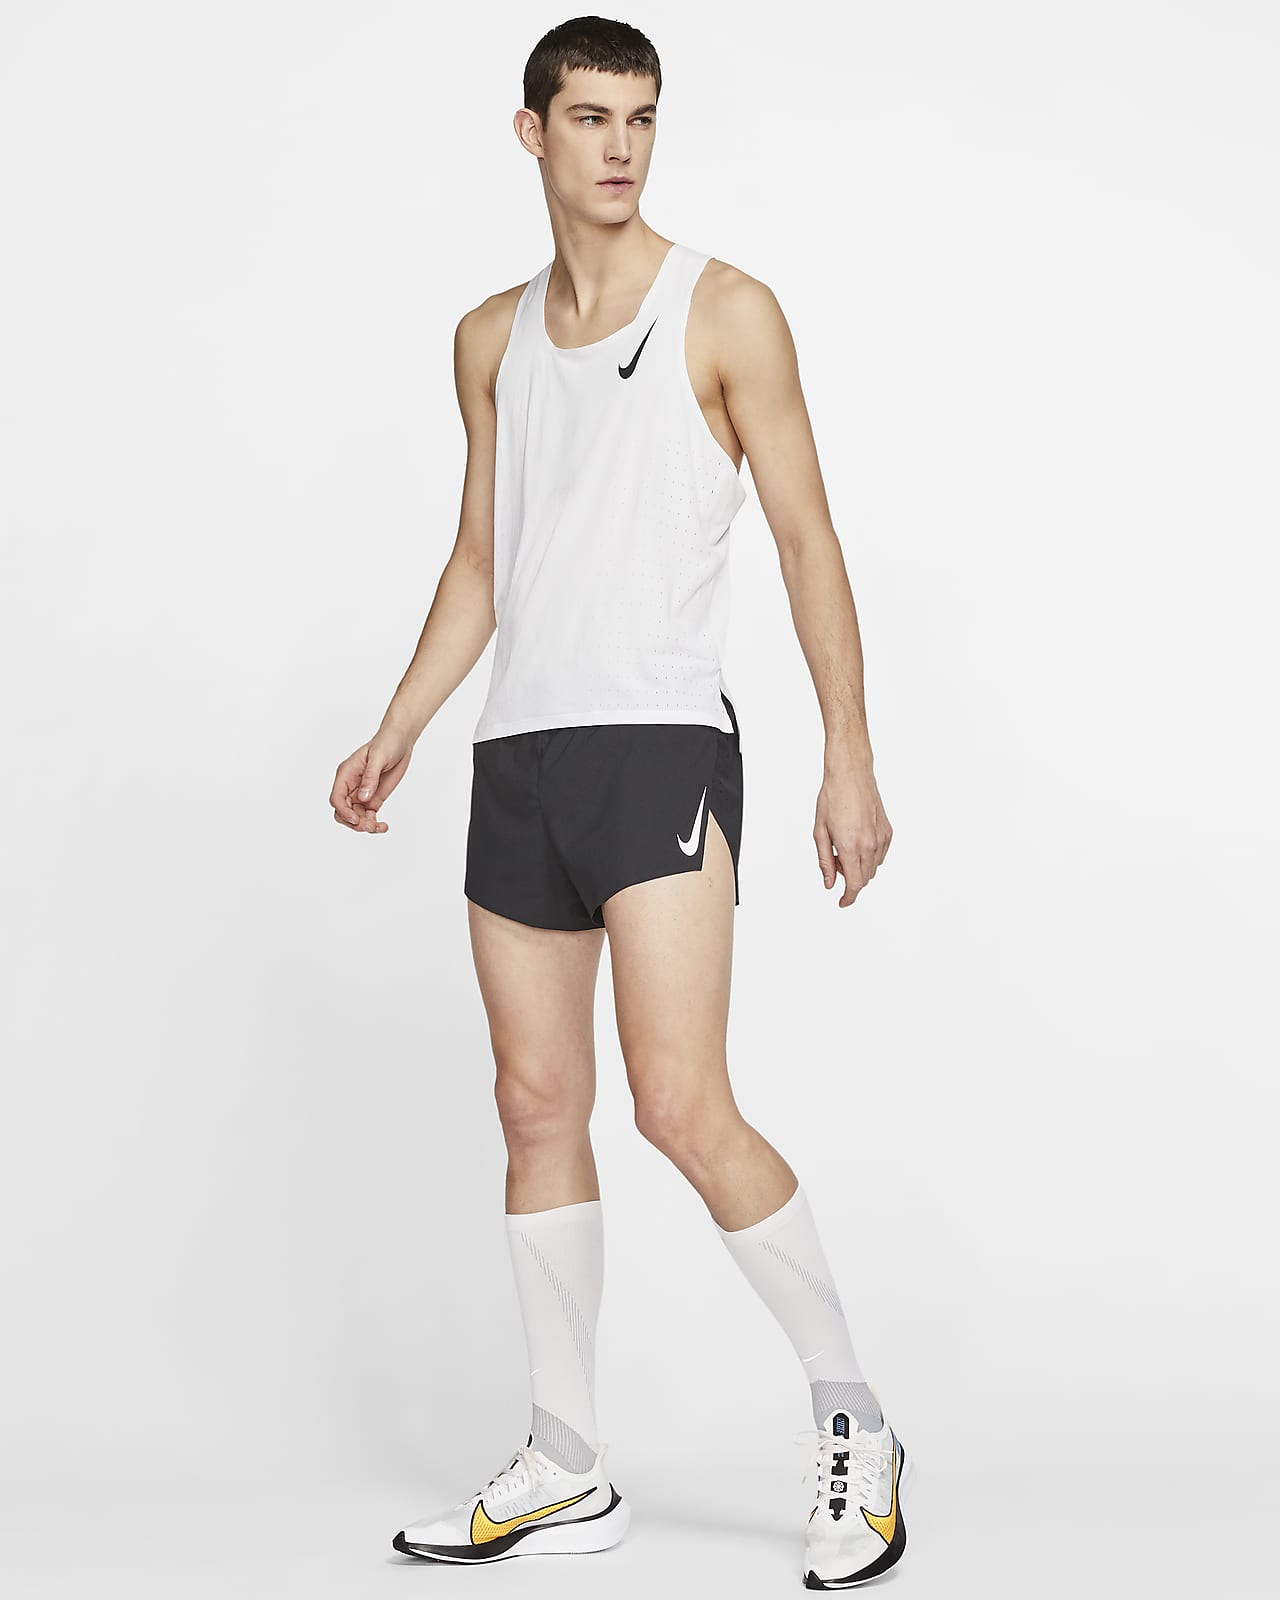 Nike AeroSwift Men's (approx.) Brief-Lined Racing Shorts.